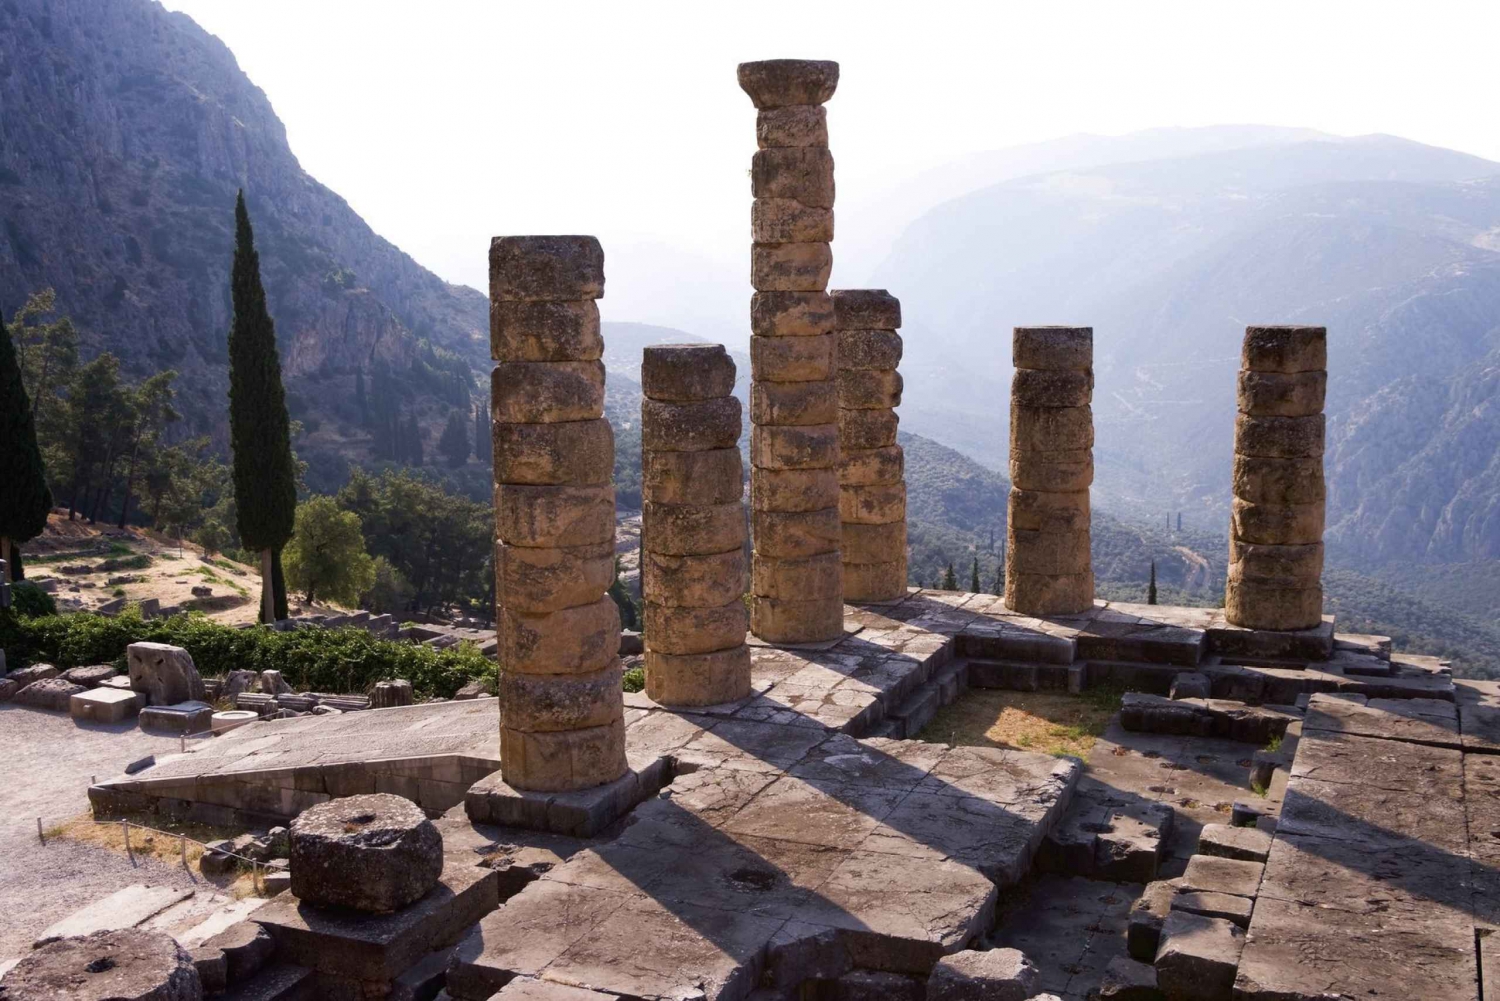 2-Days Delphi and Meteora Private Tour from Athens